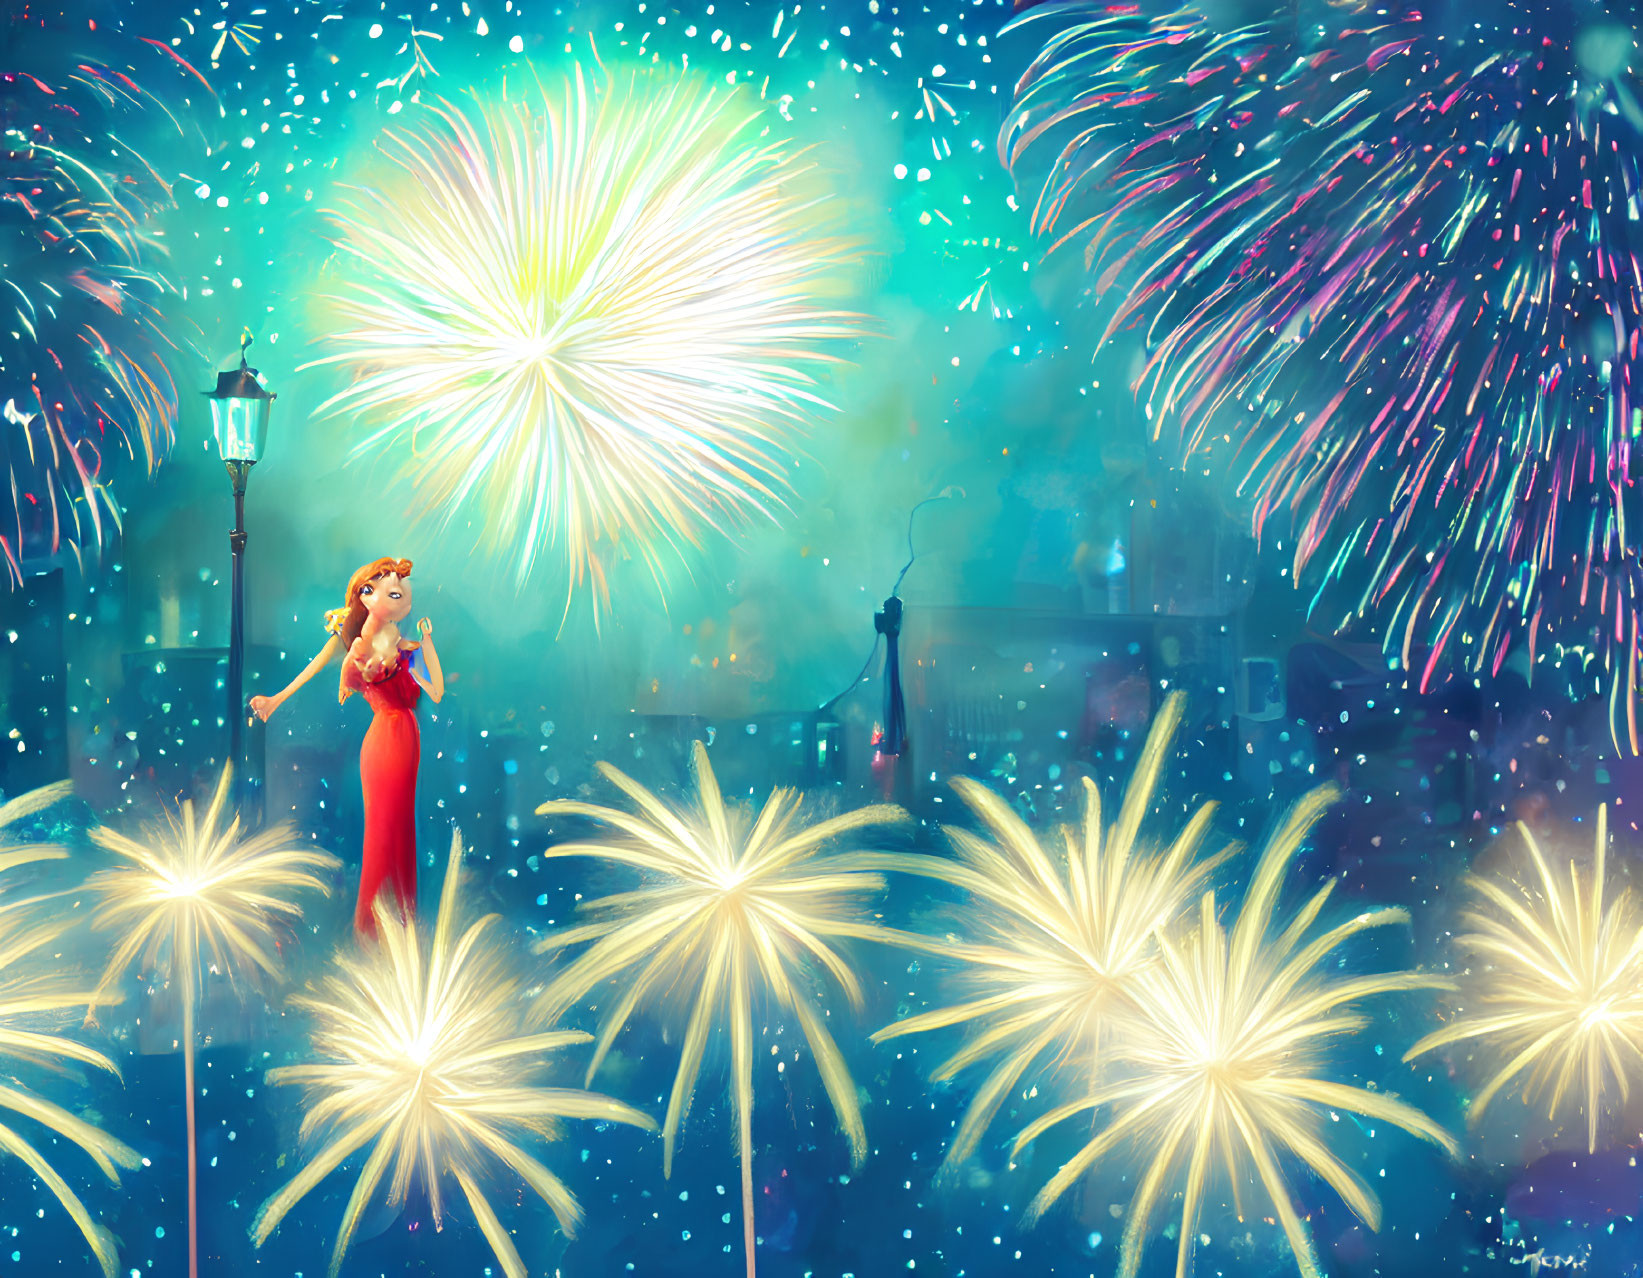 Woman in red dress near streetlamp with colorful fireworks in night sky